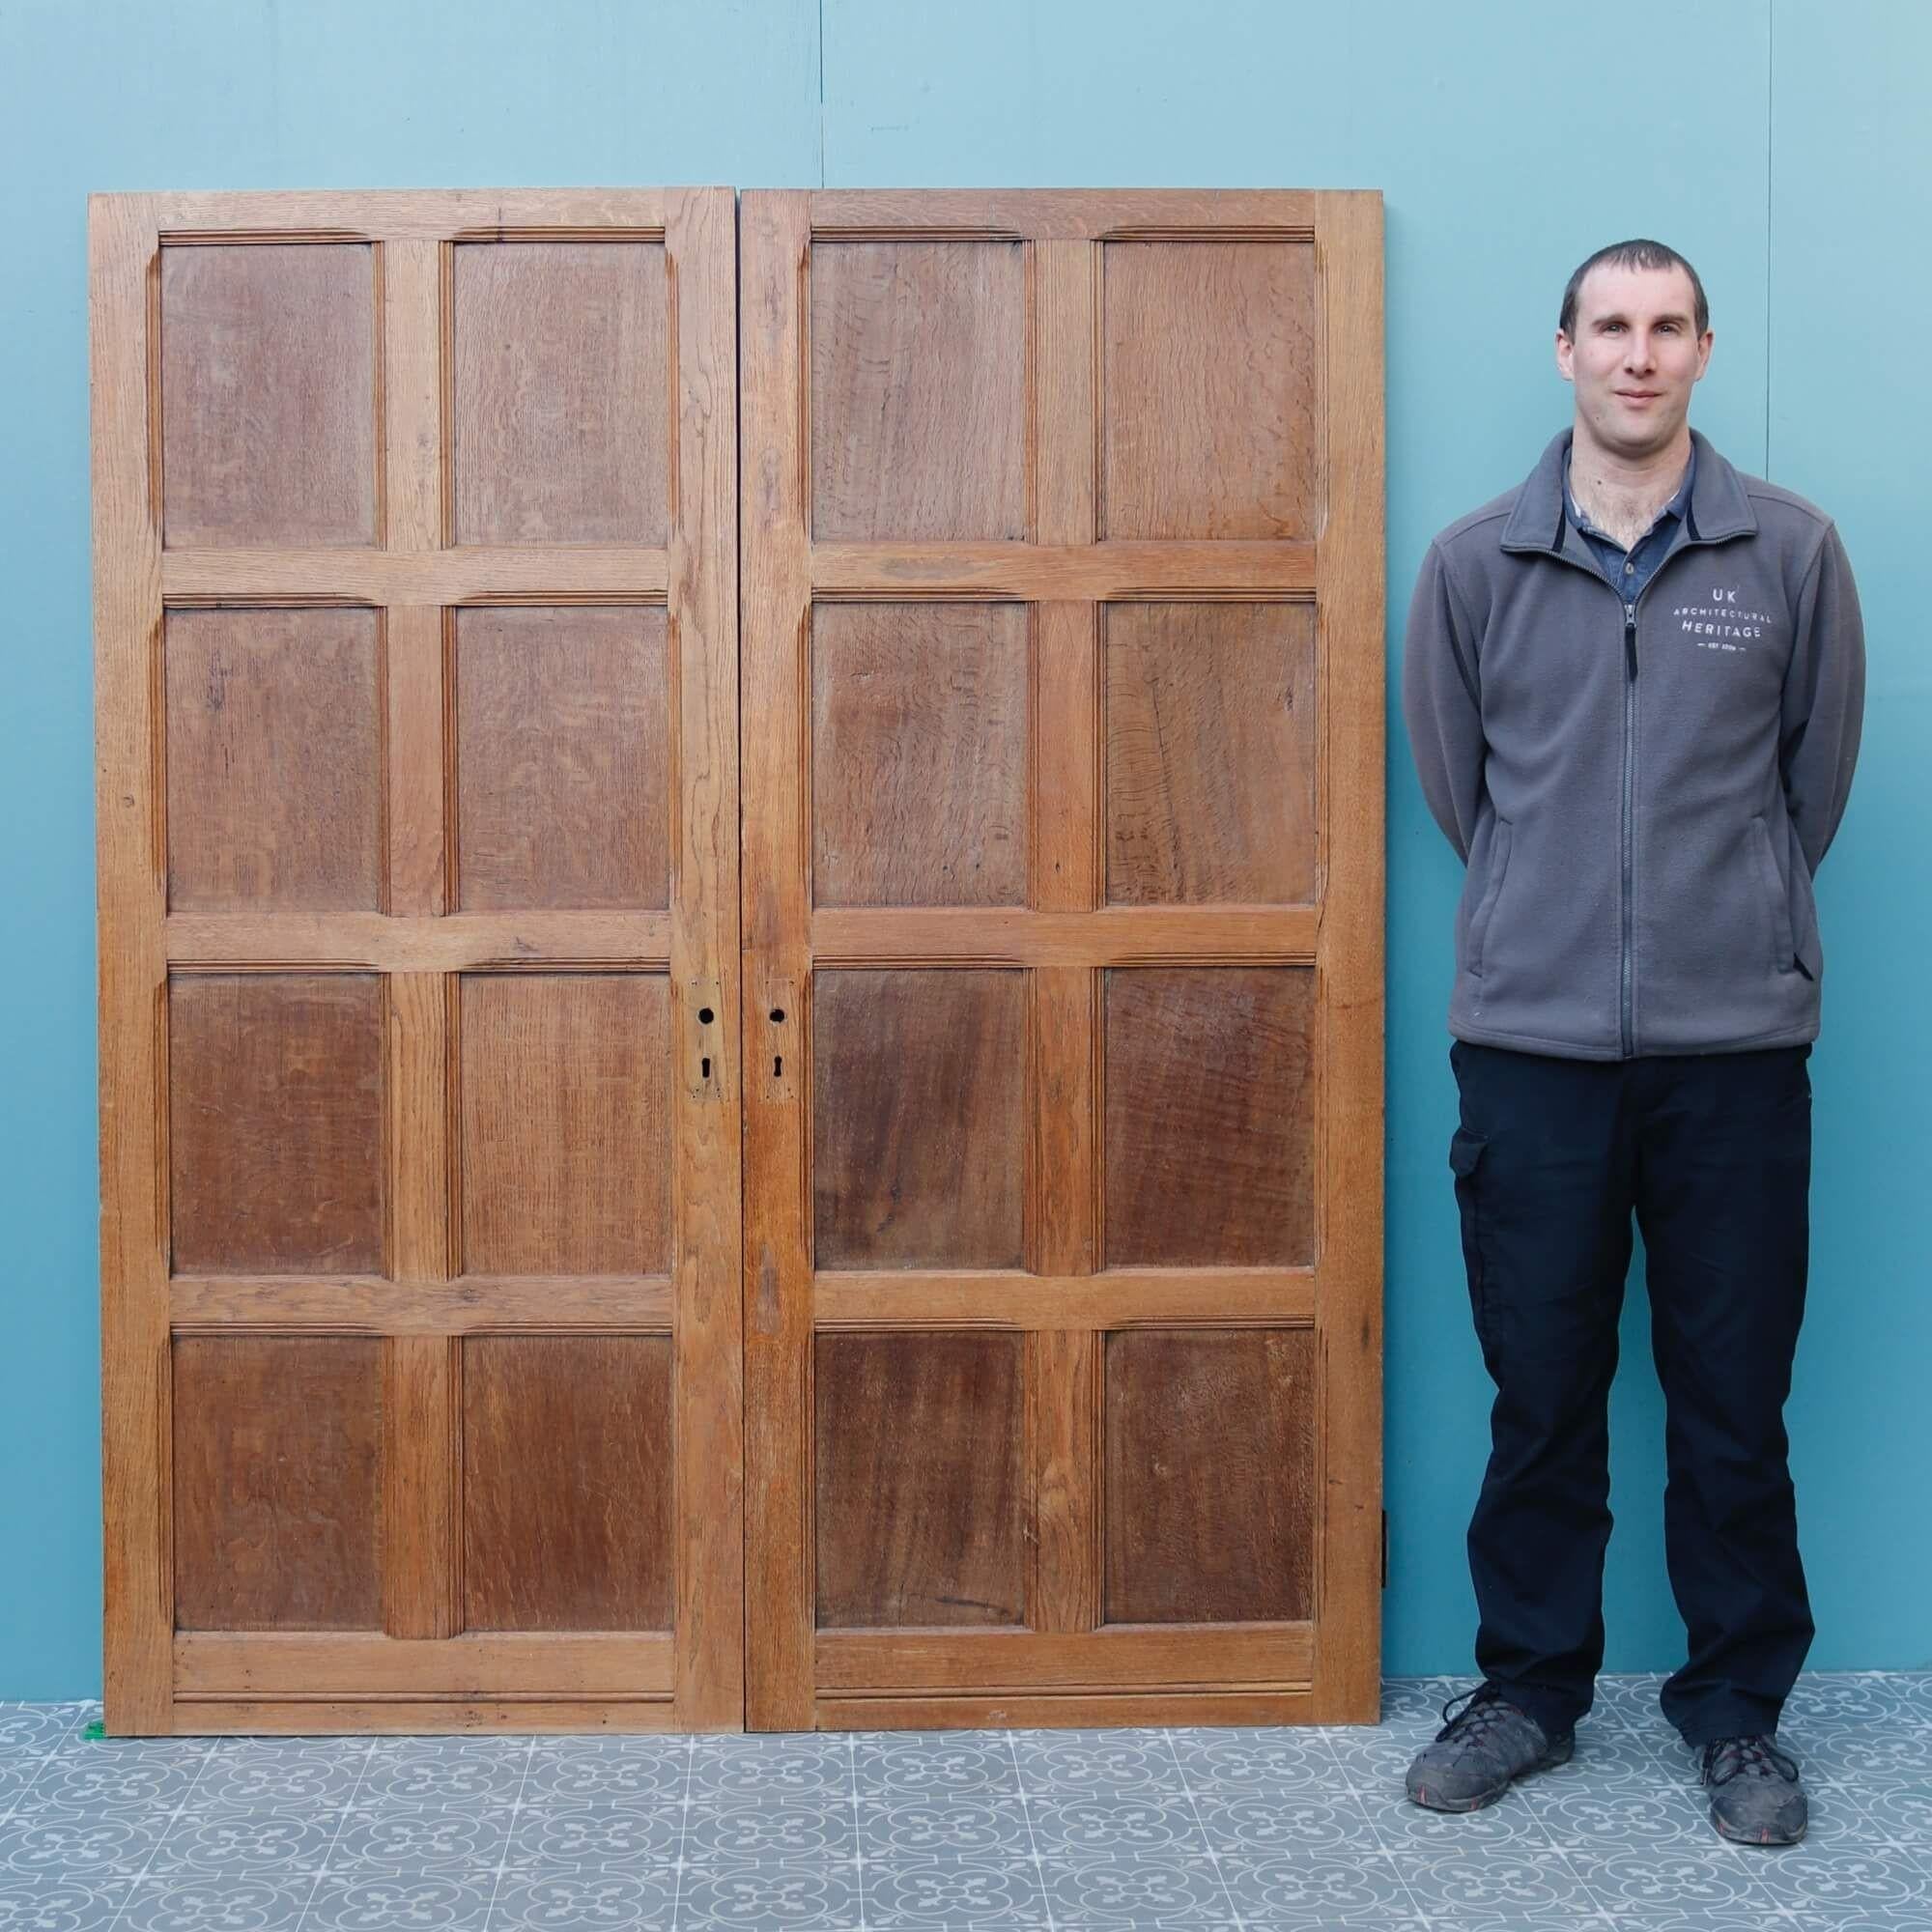 Though dating from the late 19th century Victorian era, these oak room dividing doors encompass a range of styles including Tudor, Jacobean and Georgian. These 130-year-old oak double doors are handsomely crafted, each with 8-panels to both sides